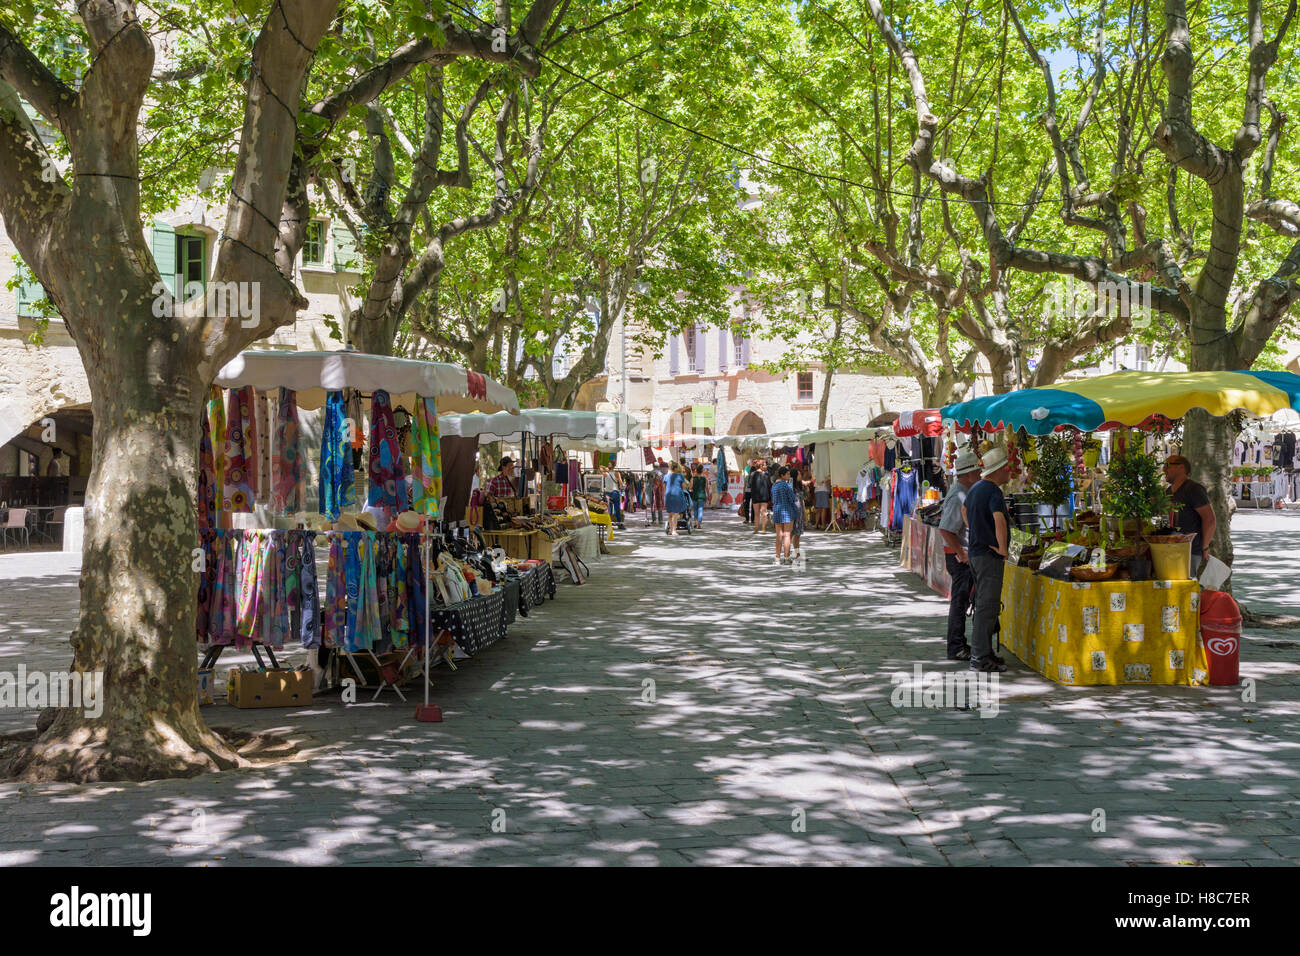 Tree shaded Place aux Herbes market in medieval Uzès town, Gard, France Stock Photo